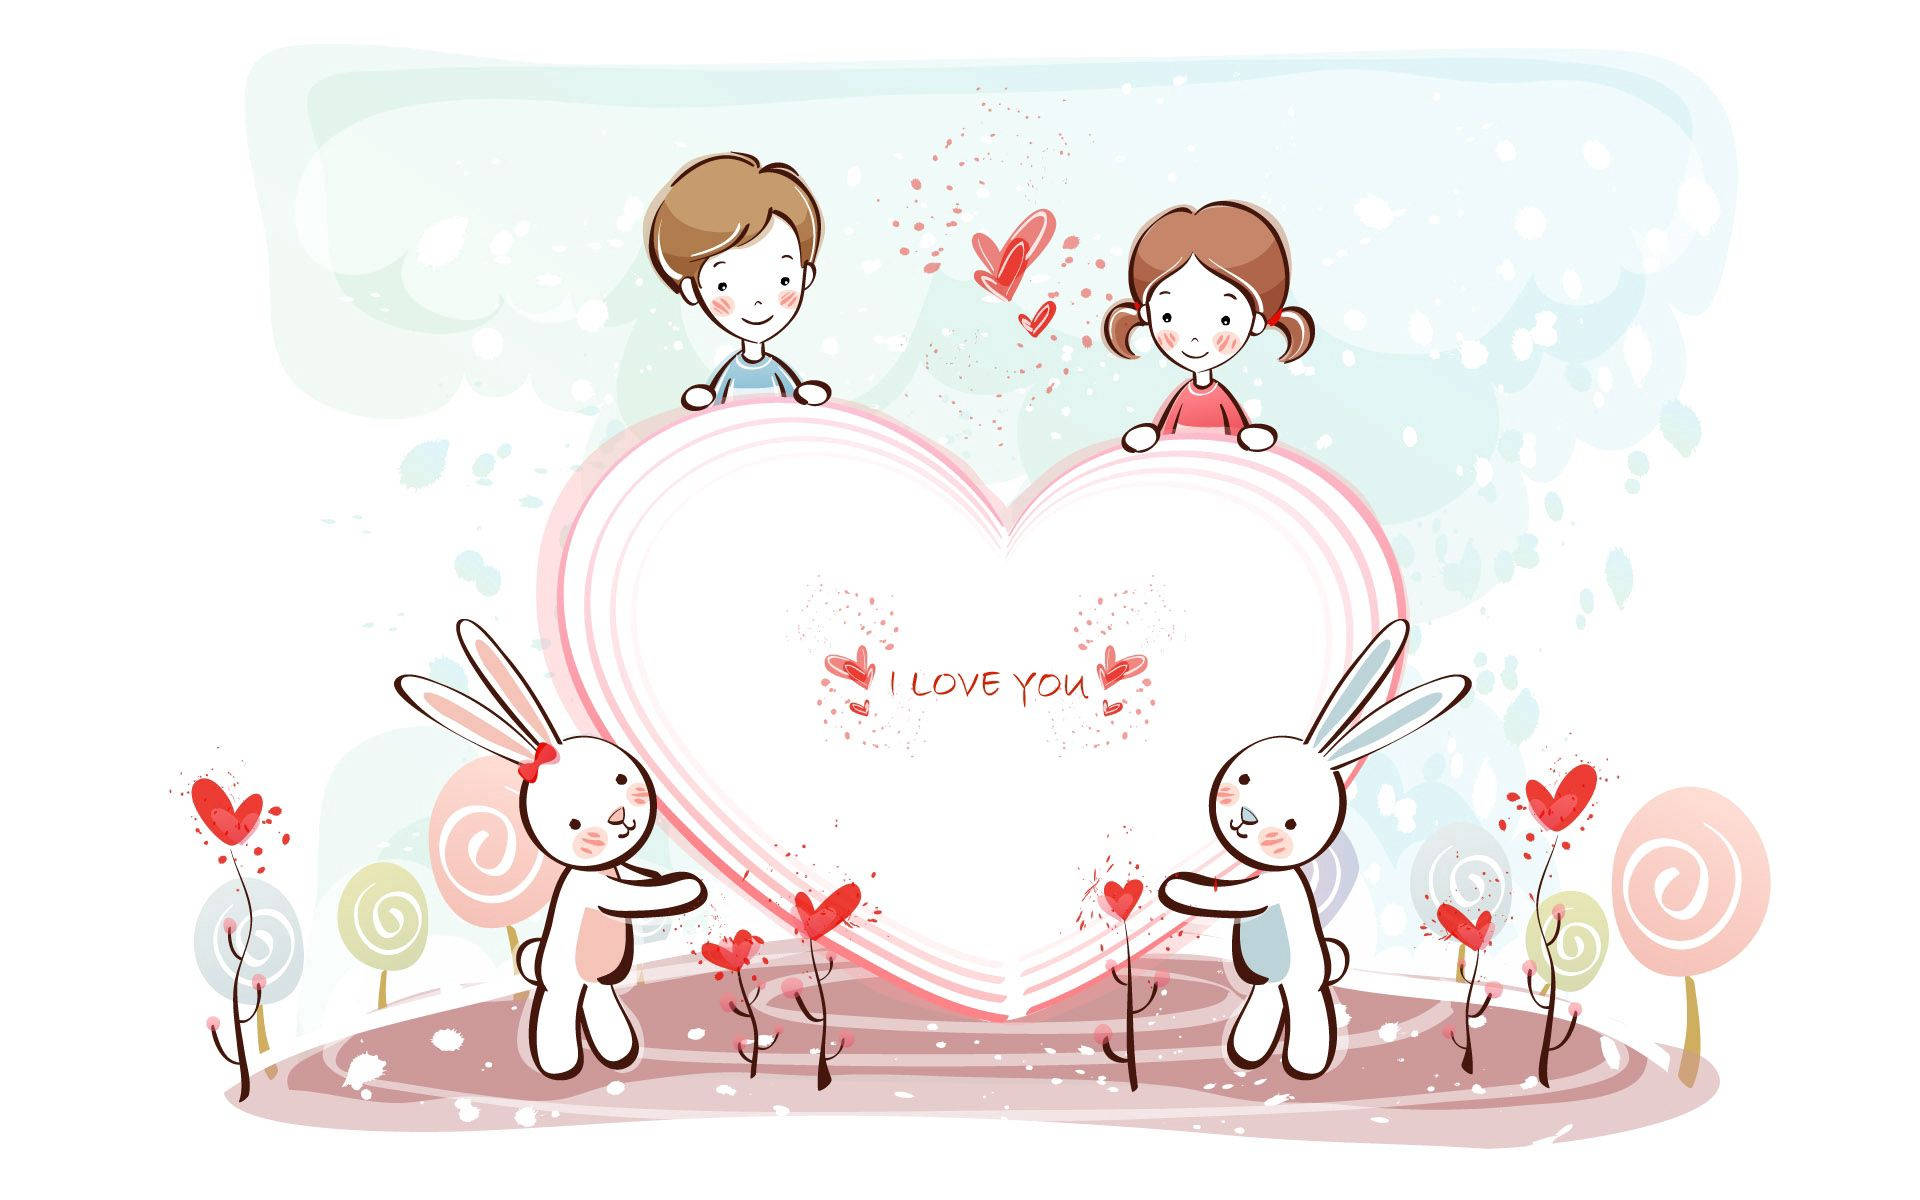 A Cartoon Of Two People Holding A Heart Shaped Heart Background